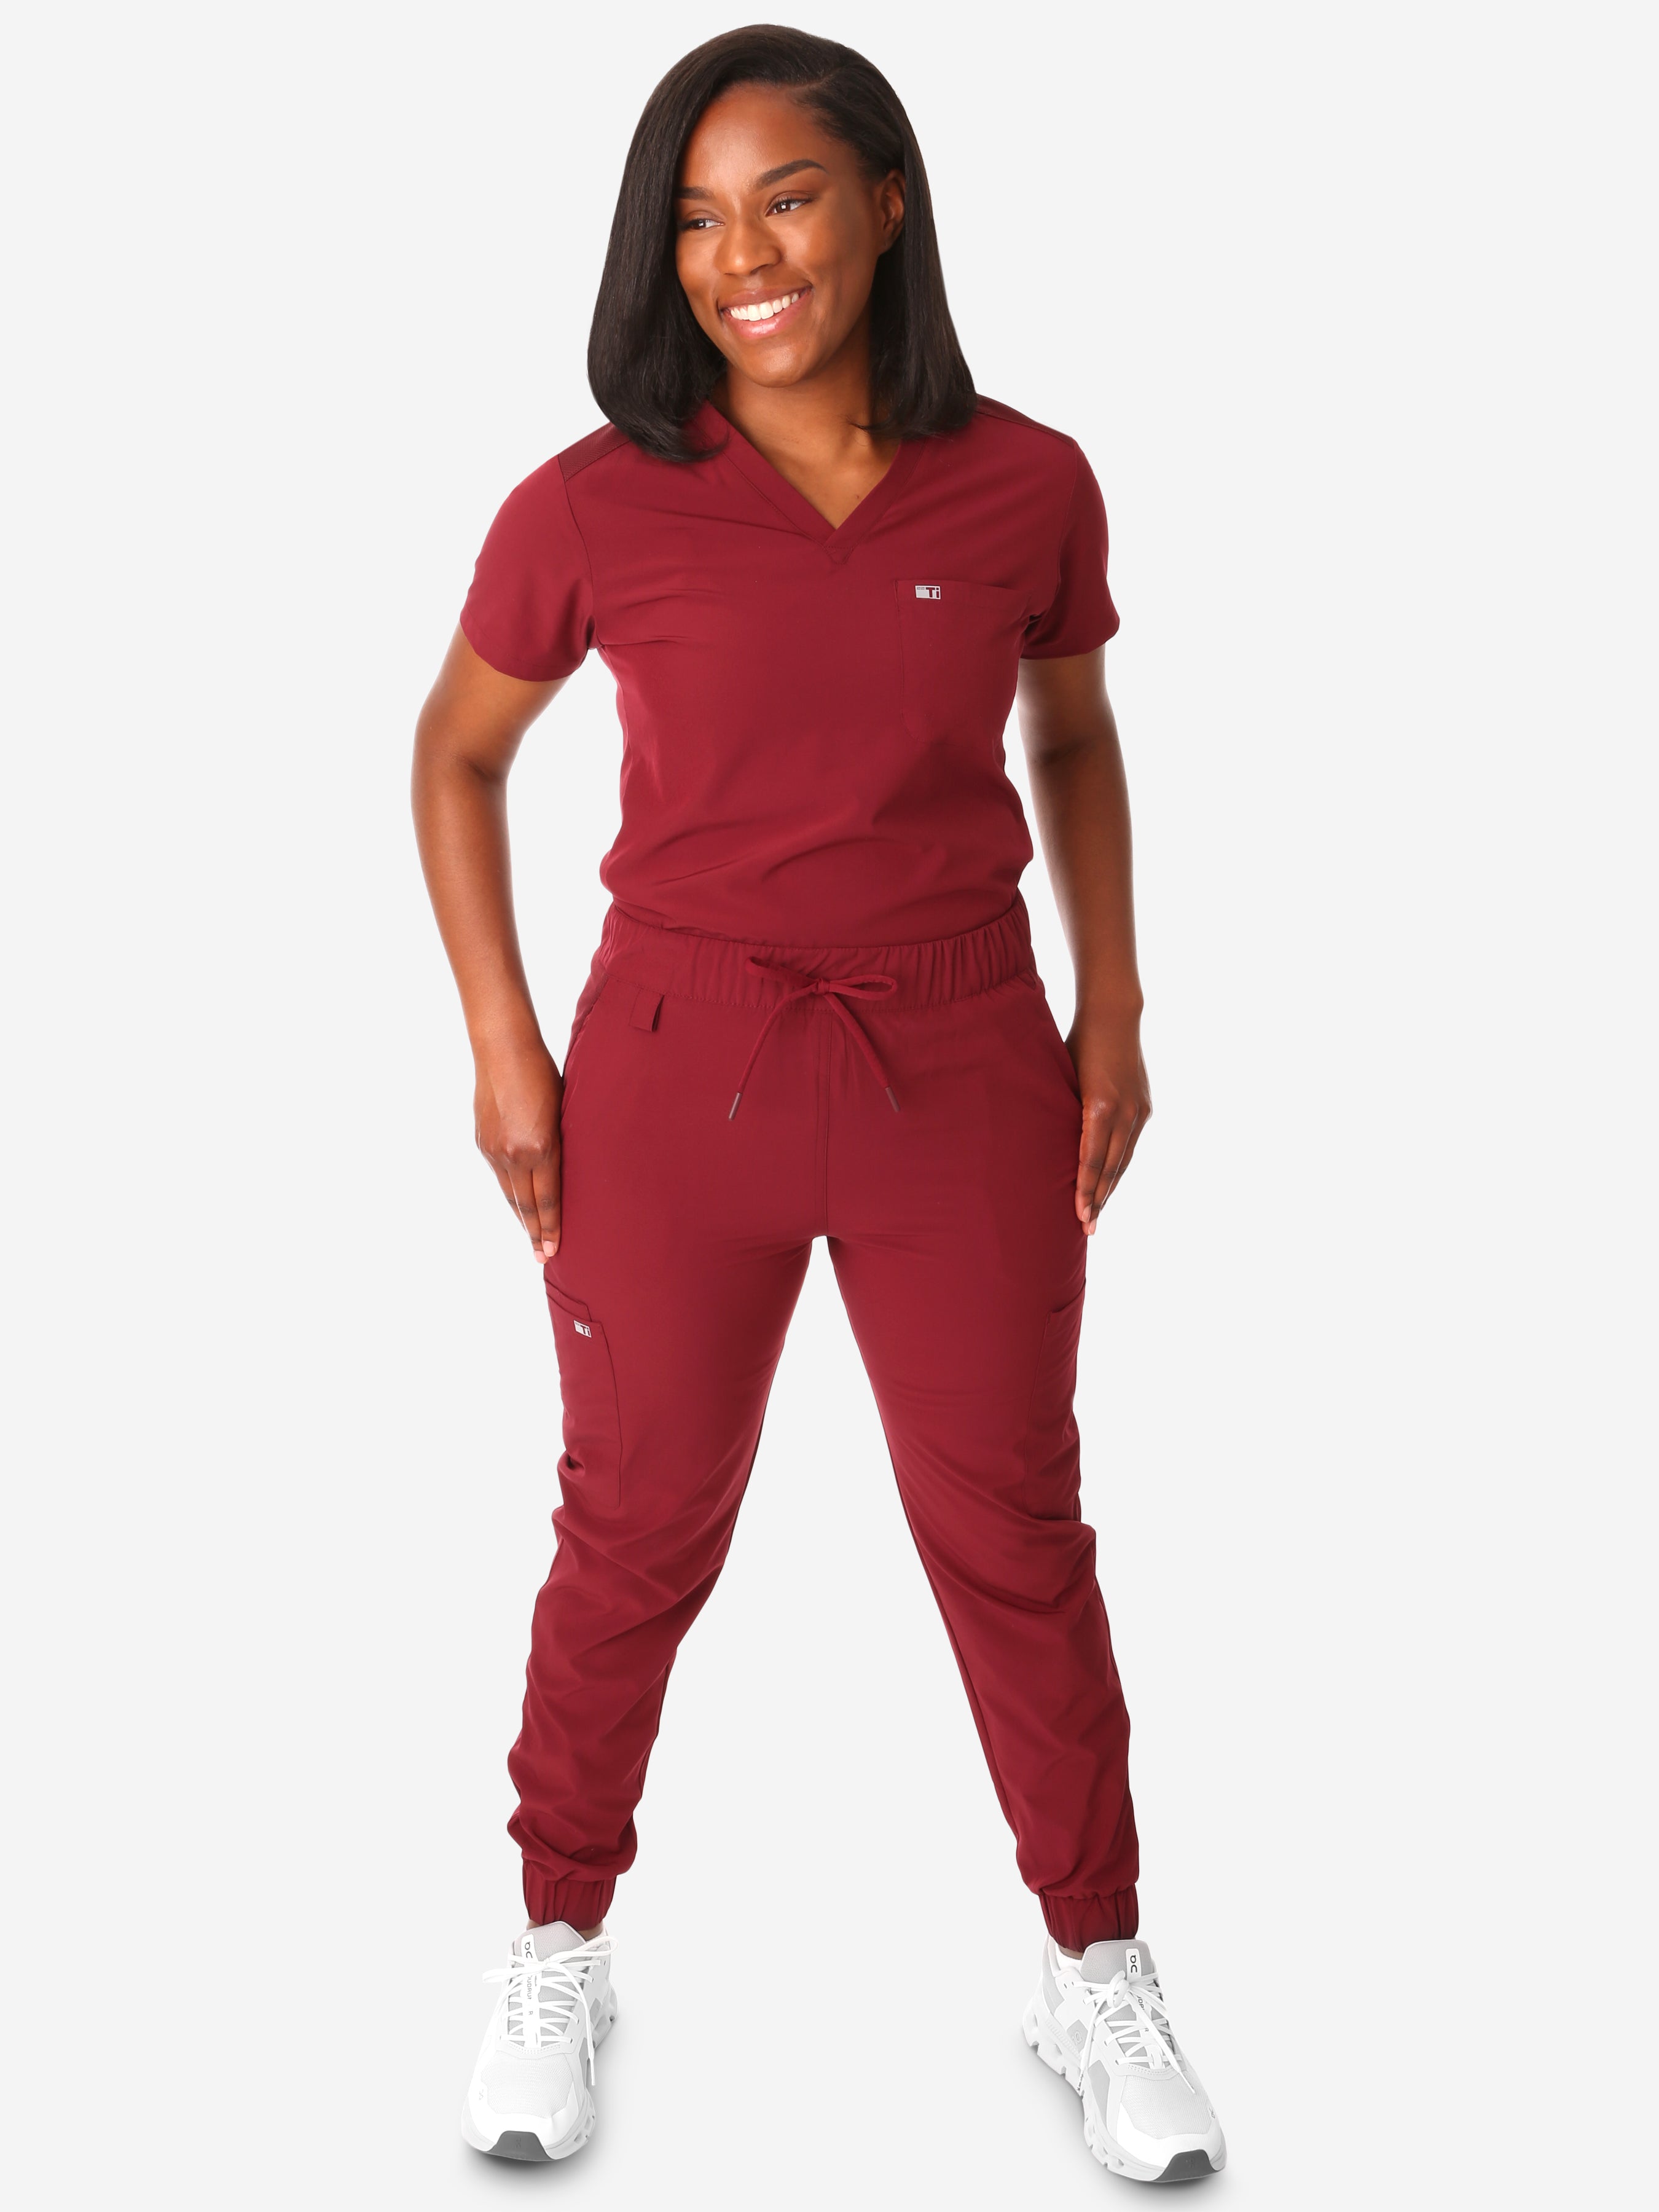 TiScrubs Women's Stretch Bold Burgundy One-Pocket Tuckable Scrub Top and 9-Pocket Pants Untucked  Full Body Front